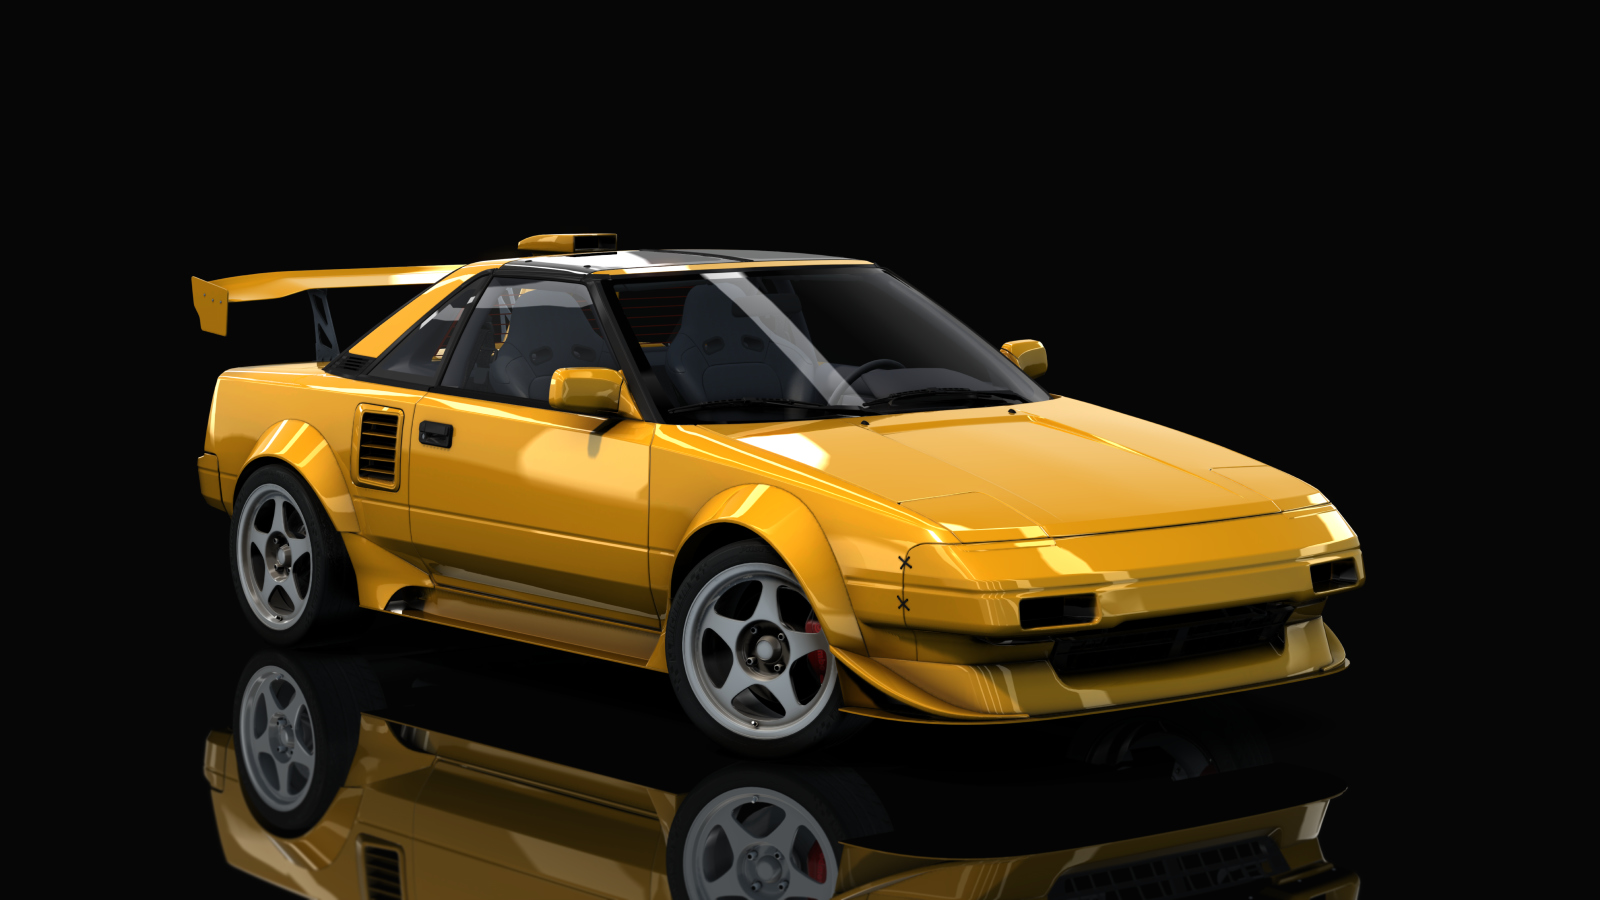 Toyota MR2 SC AW11 Time Attack, skin Yellow